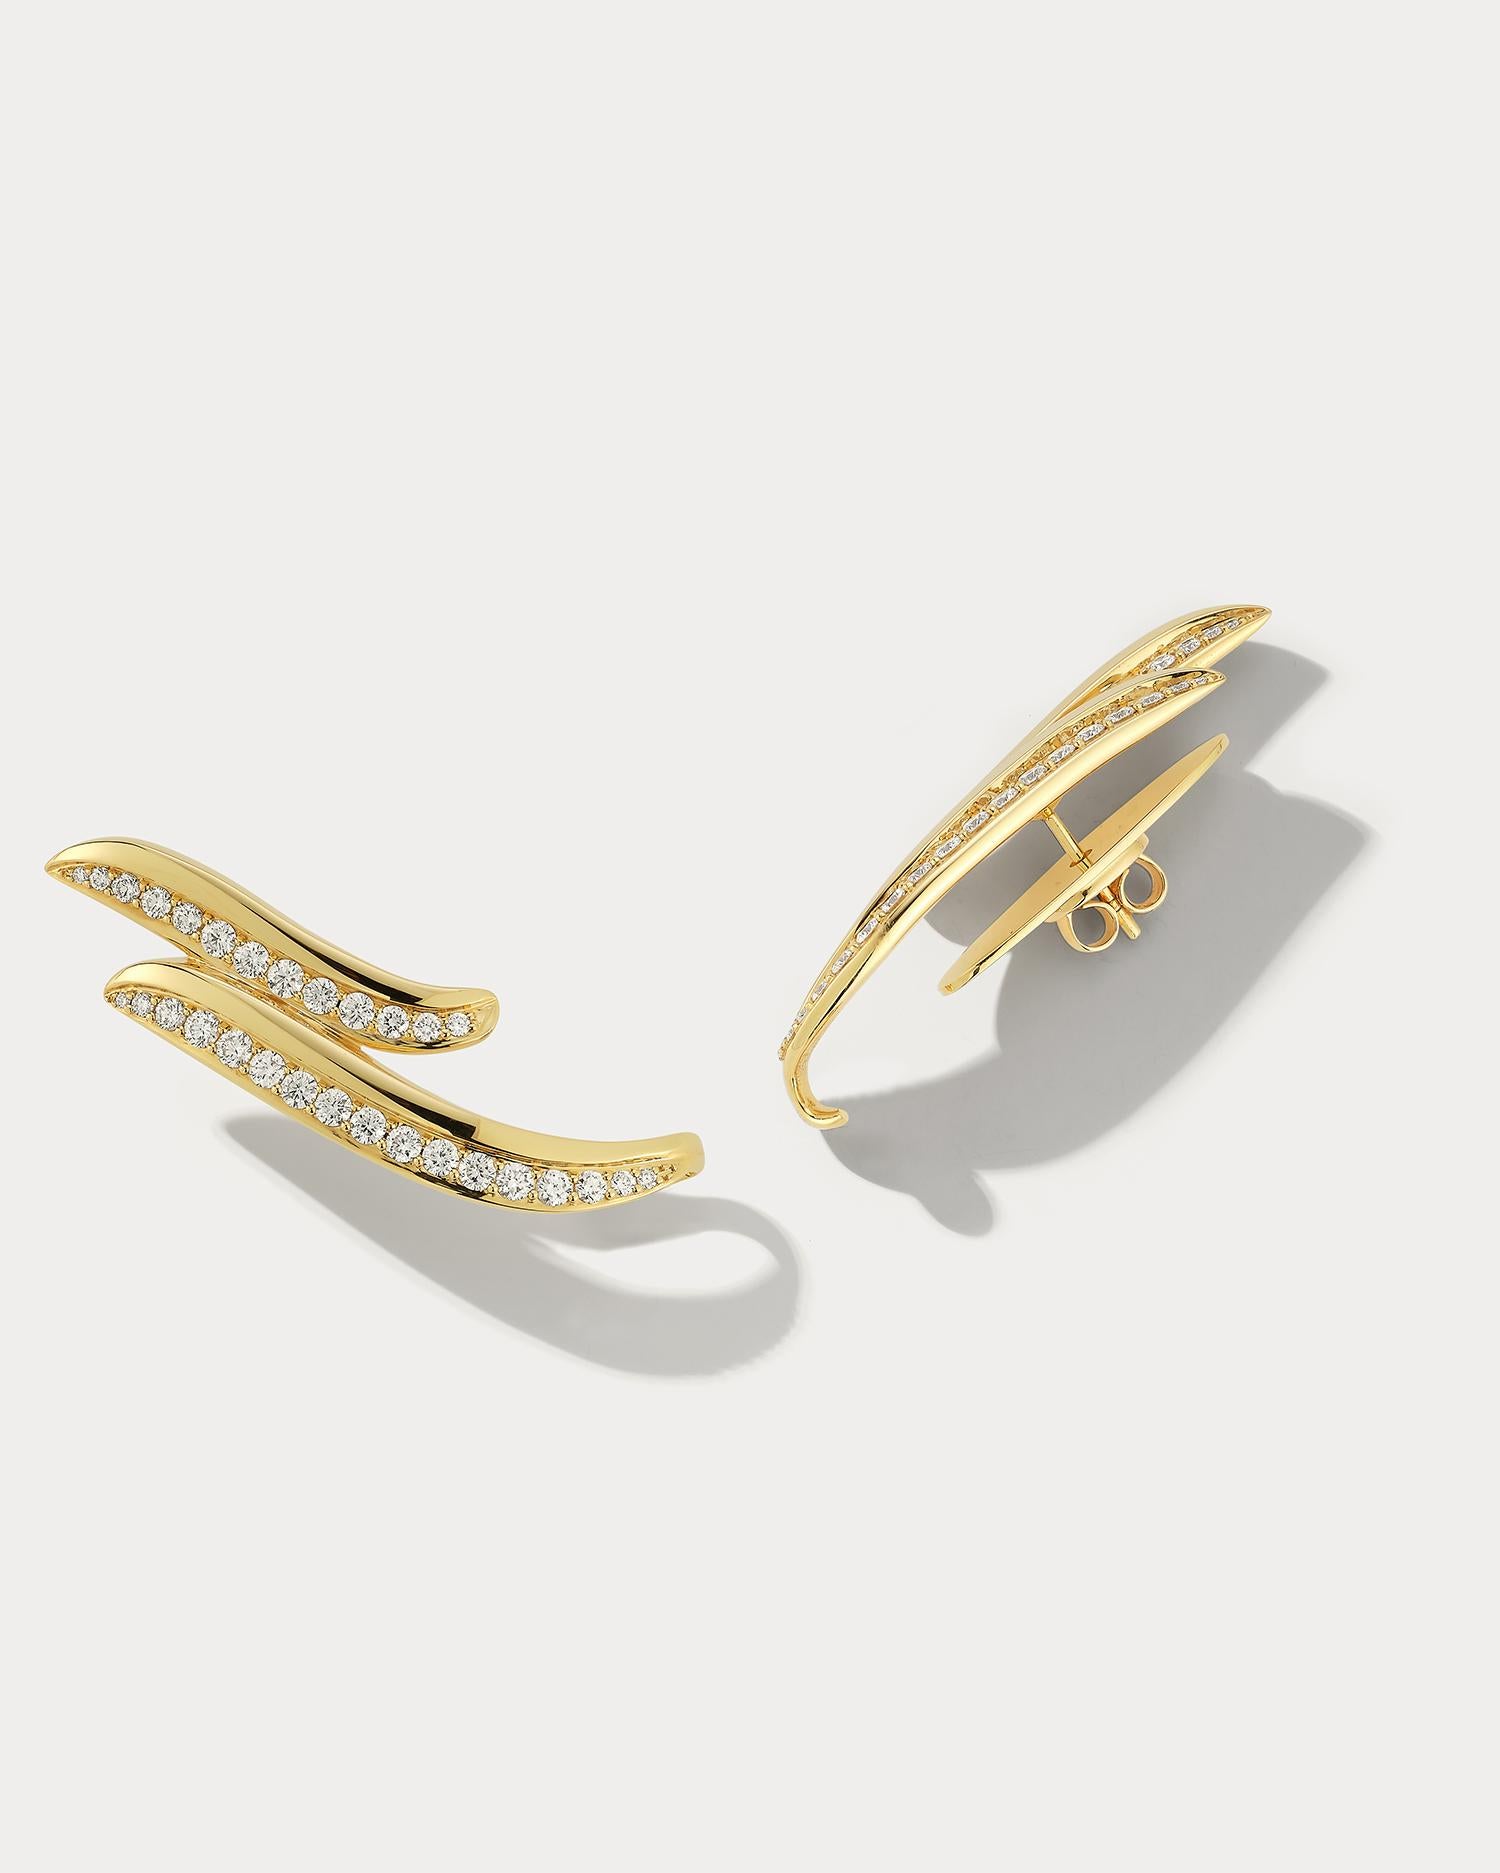 These stunning earrings are crafted from 18k yellow gold and feature a unique wave design with shimmering diamonds across. The earring sits angular on your ear giving it a stylish vibe. The earrings have a secure post and butterfly back, ensuring